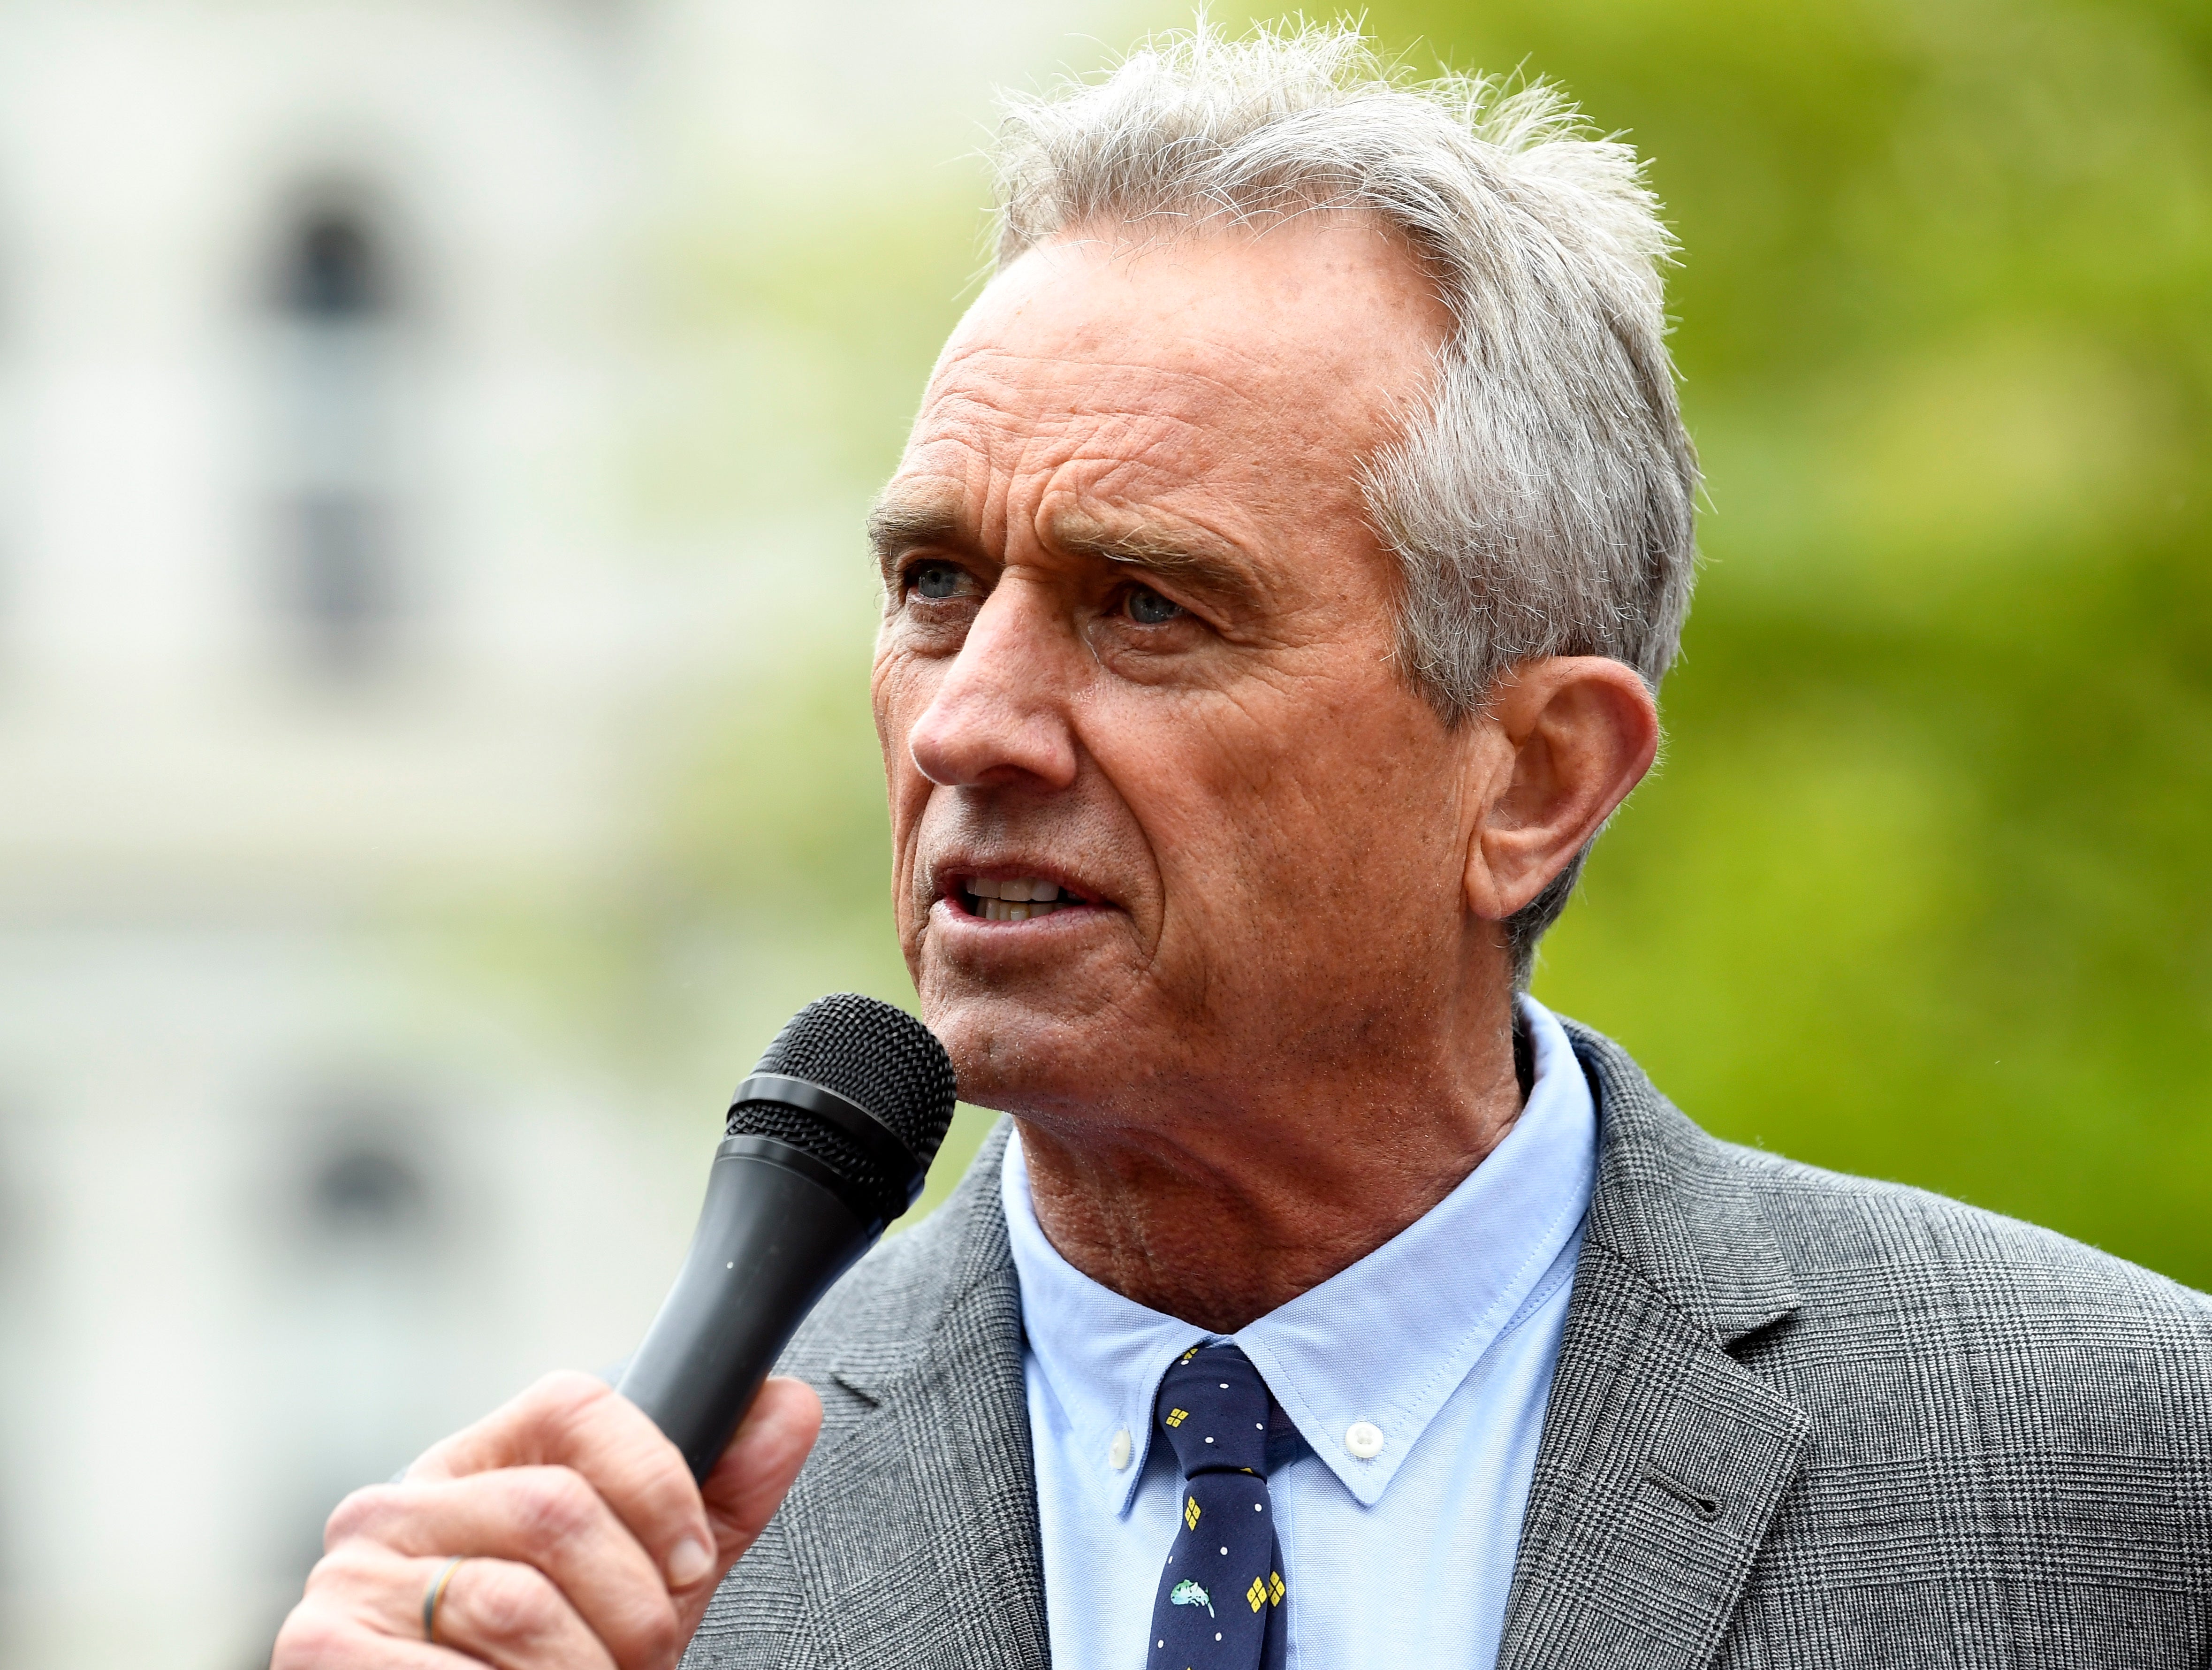 Robert F Kennedy Jr has had to apologise for comparing vaccine mandates to the Holocaust